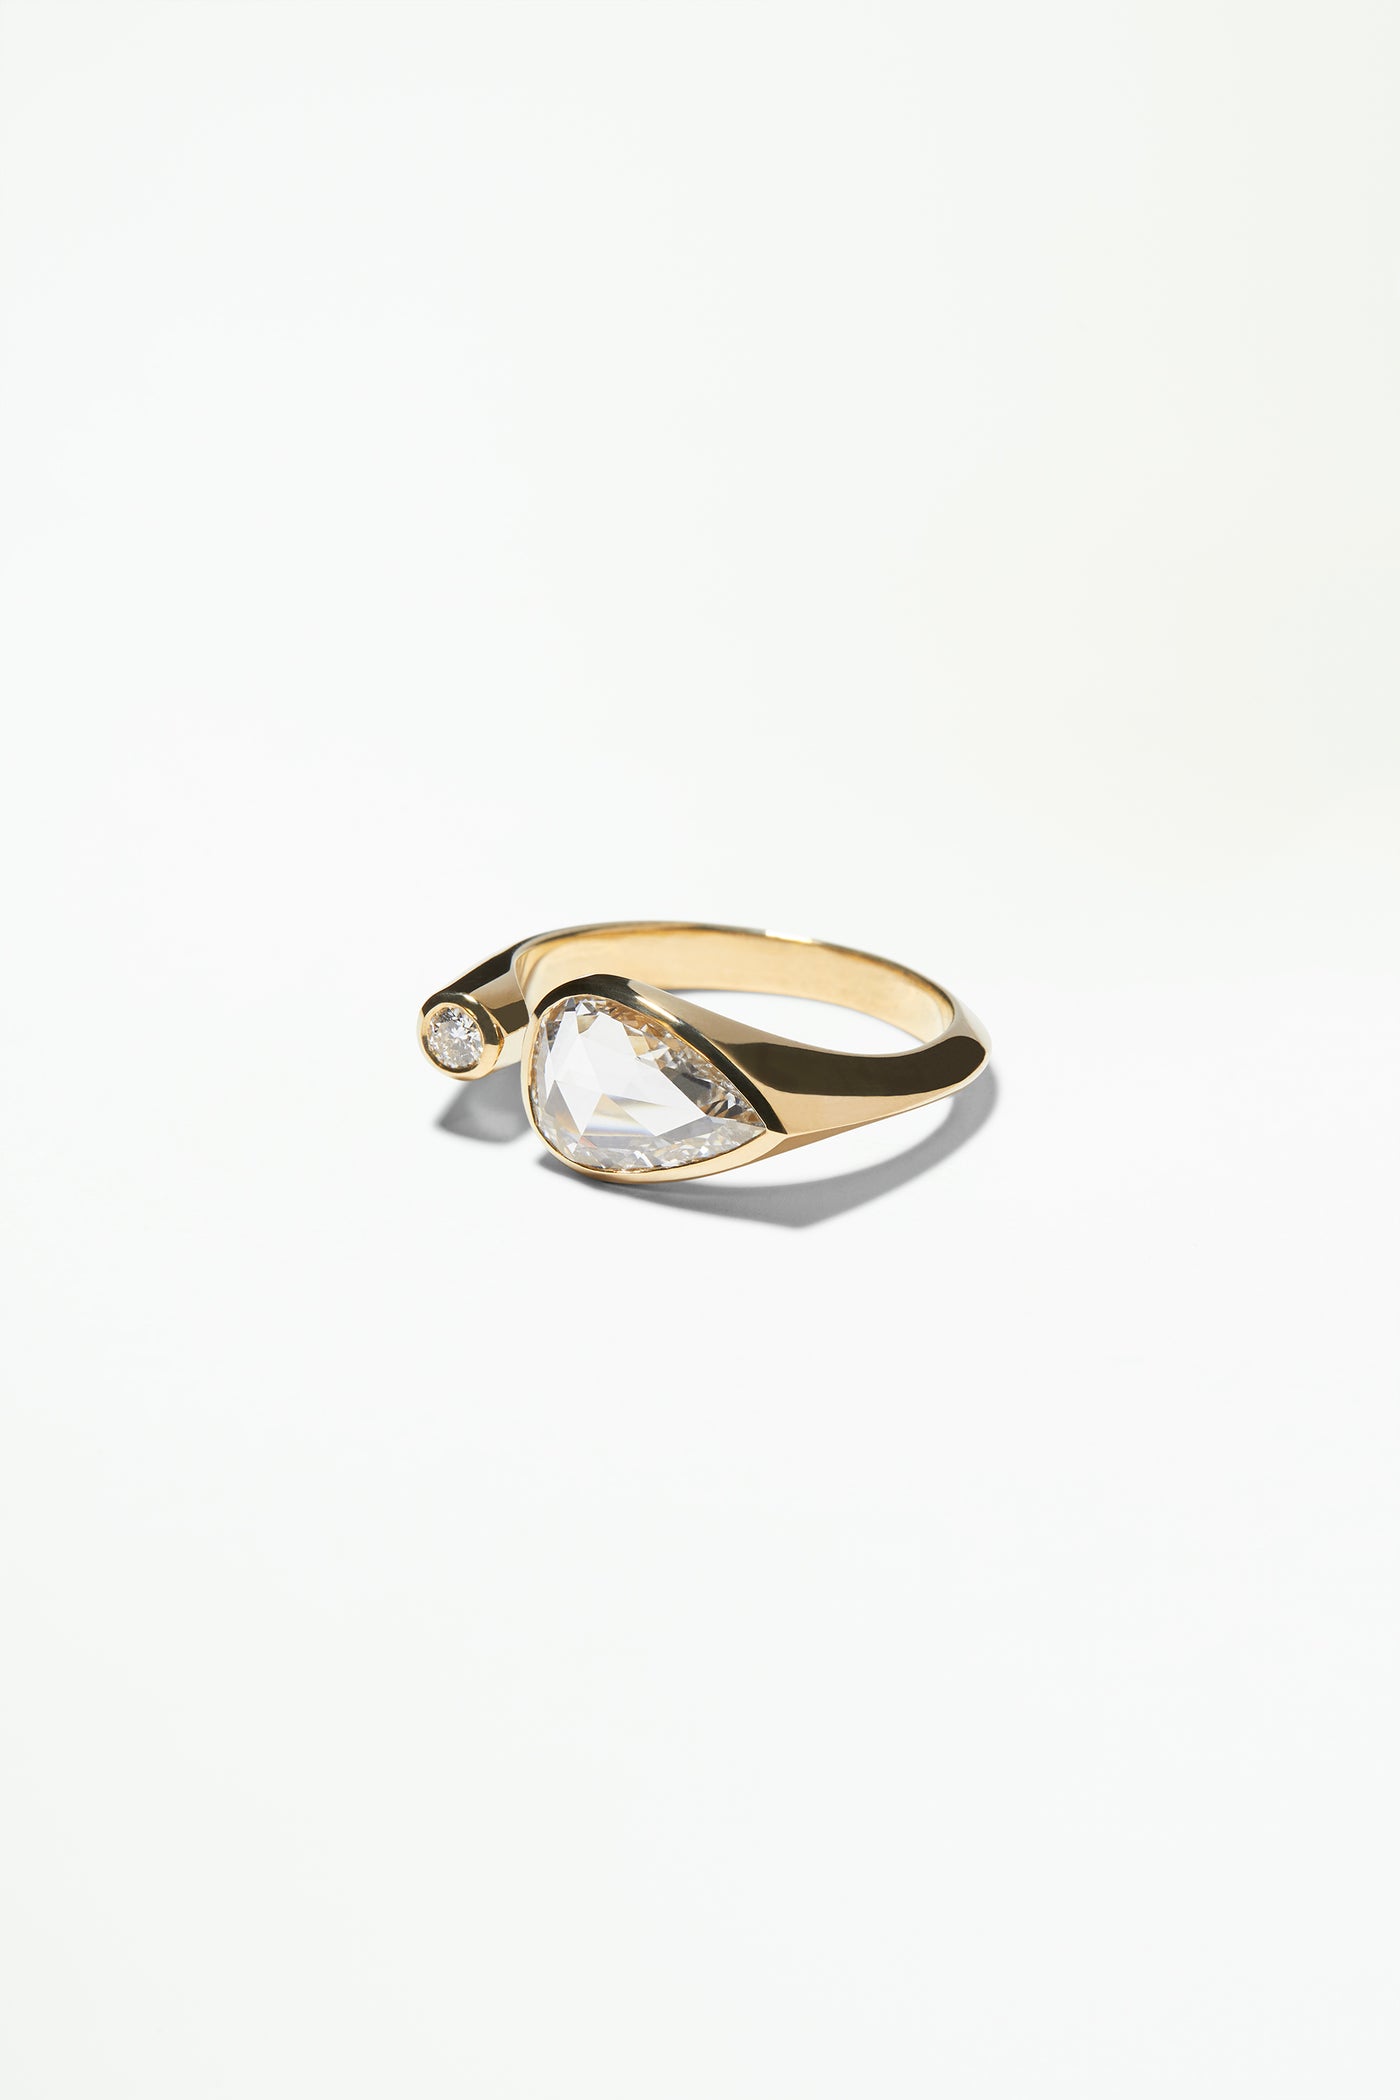 One of a Kind Dyad Signet Ring No. 2